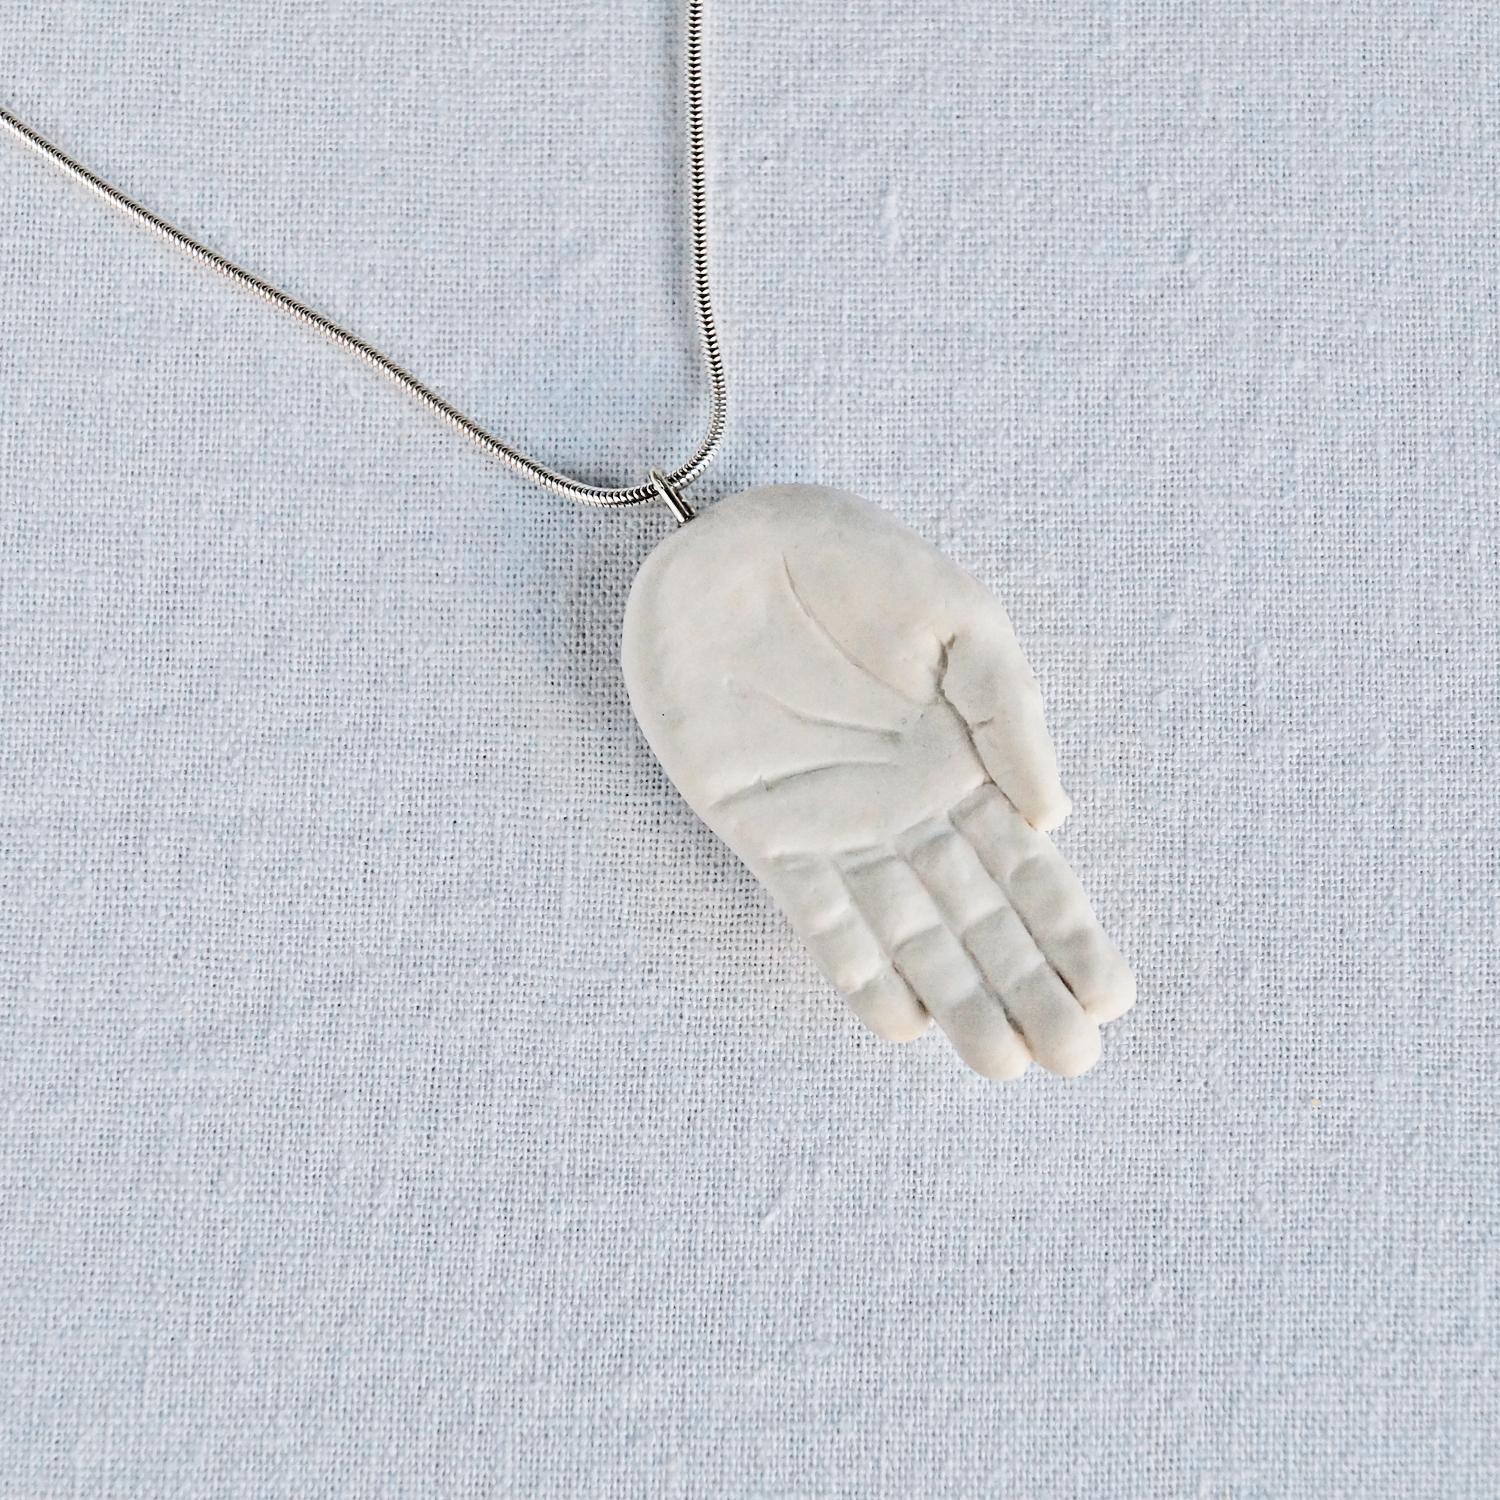 White porcelain hand necklace, hand jewellery, sculpted hand, platinum lustre nails, craft worker gift, white porcelain gift, 18th wedding anniversary, birthday gift, 925 sterling silver, snake chain, omega necklet, 18th anniversary gift for women, 18th anniversary porcelain jewellery, 18th anniversary porcelain necklace, first anniversary paper, 1st paper gift, Valentines day gift, 18th anniversary porcelain necklace, UK, native american hand peace sign,